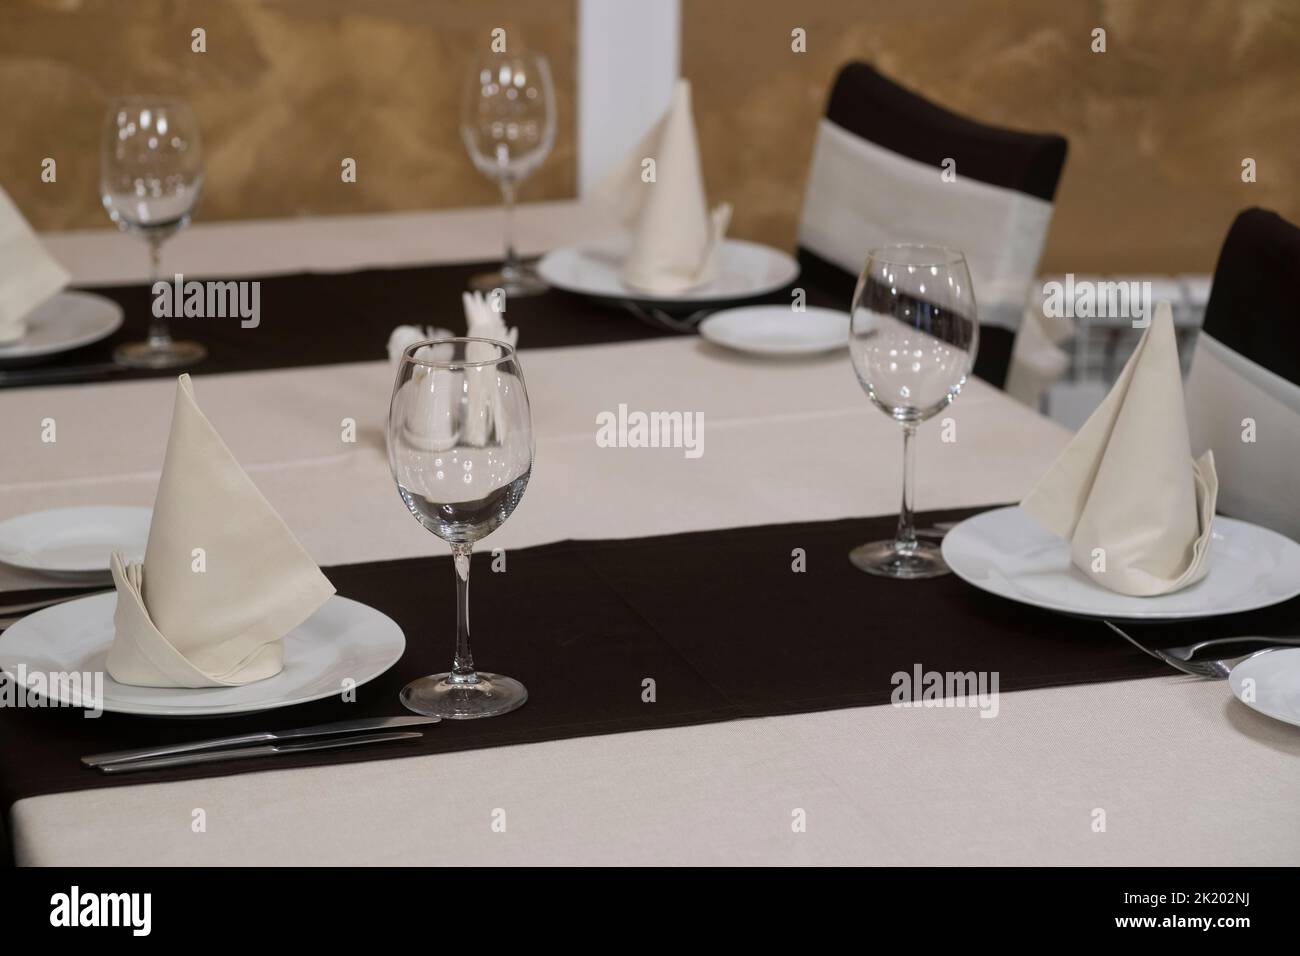 Banquet table with wineglasses. High angle of elegant banquet table served for wedding celebration. Stock Photo